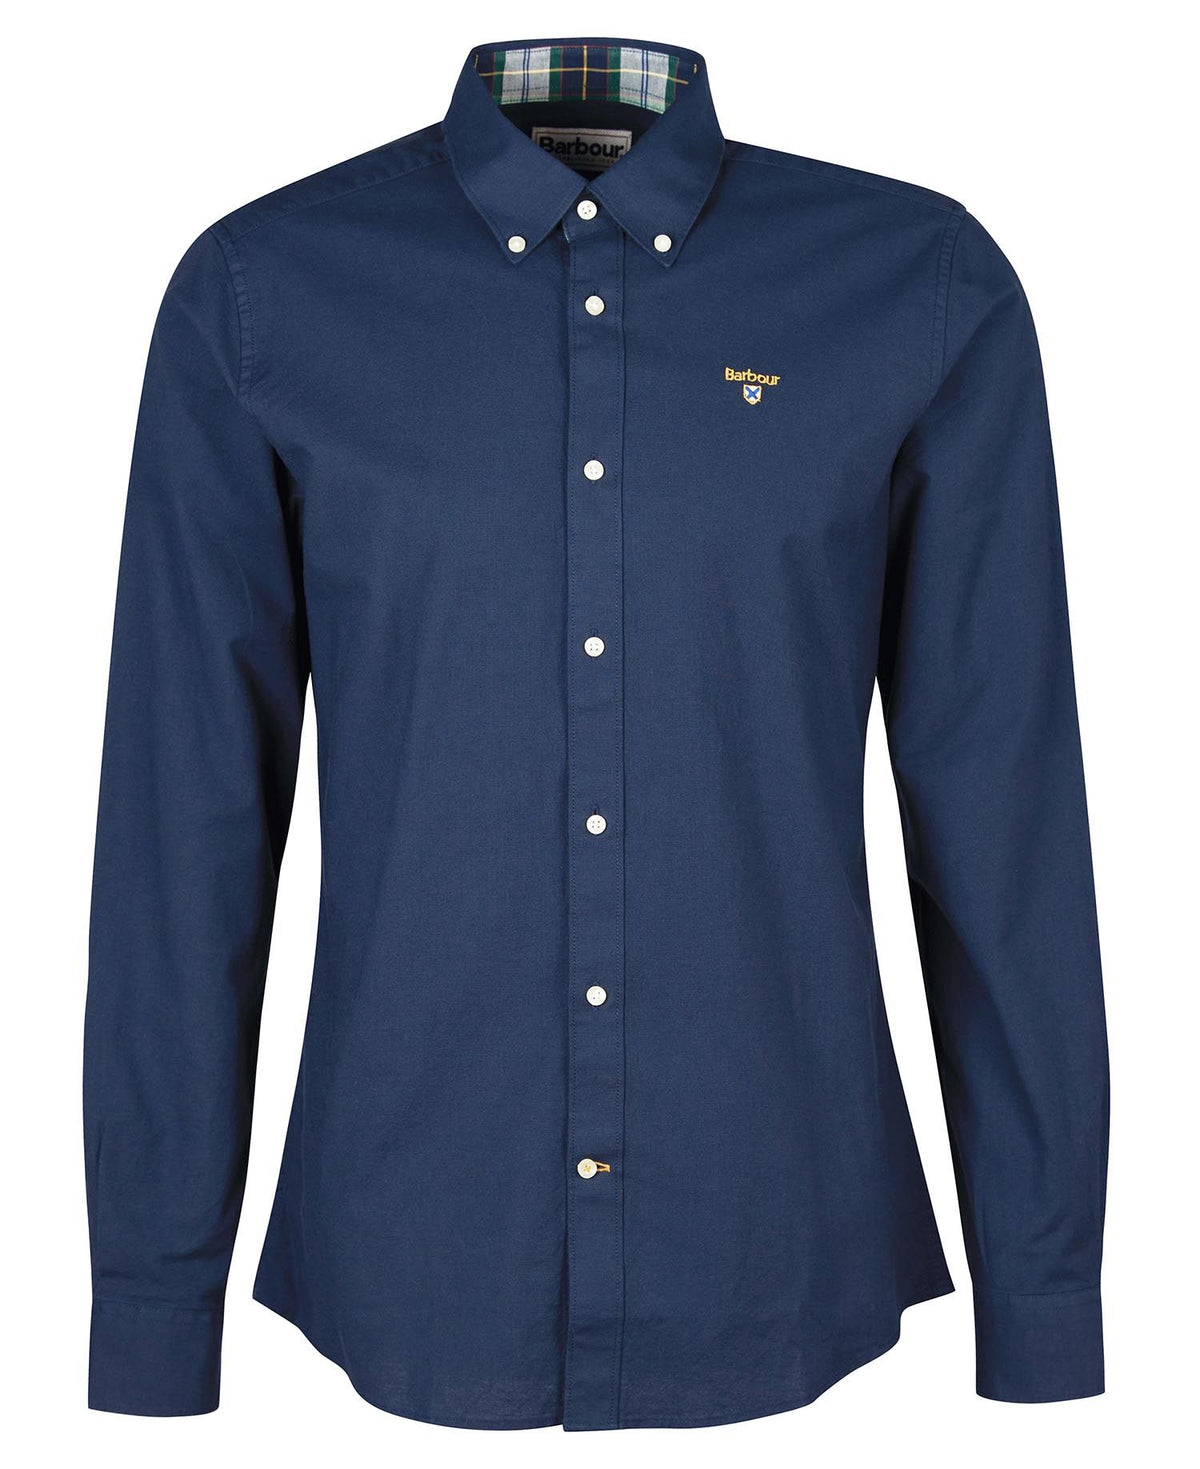 Barbour Camford men's tailored shirt in blue